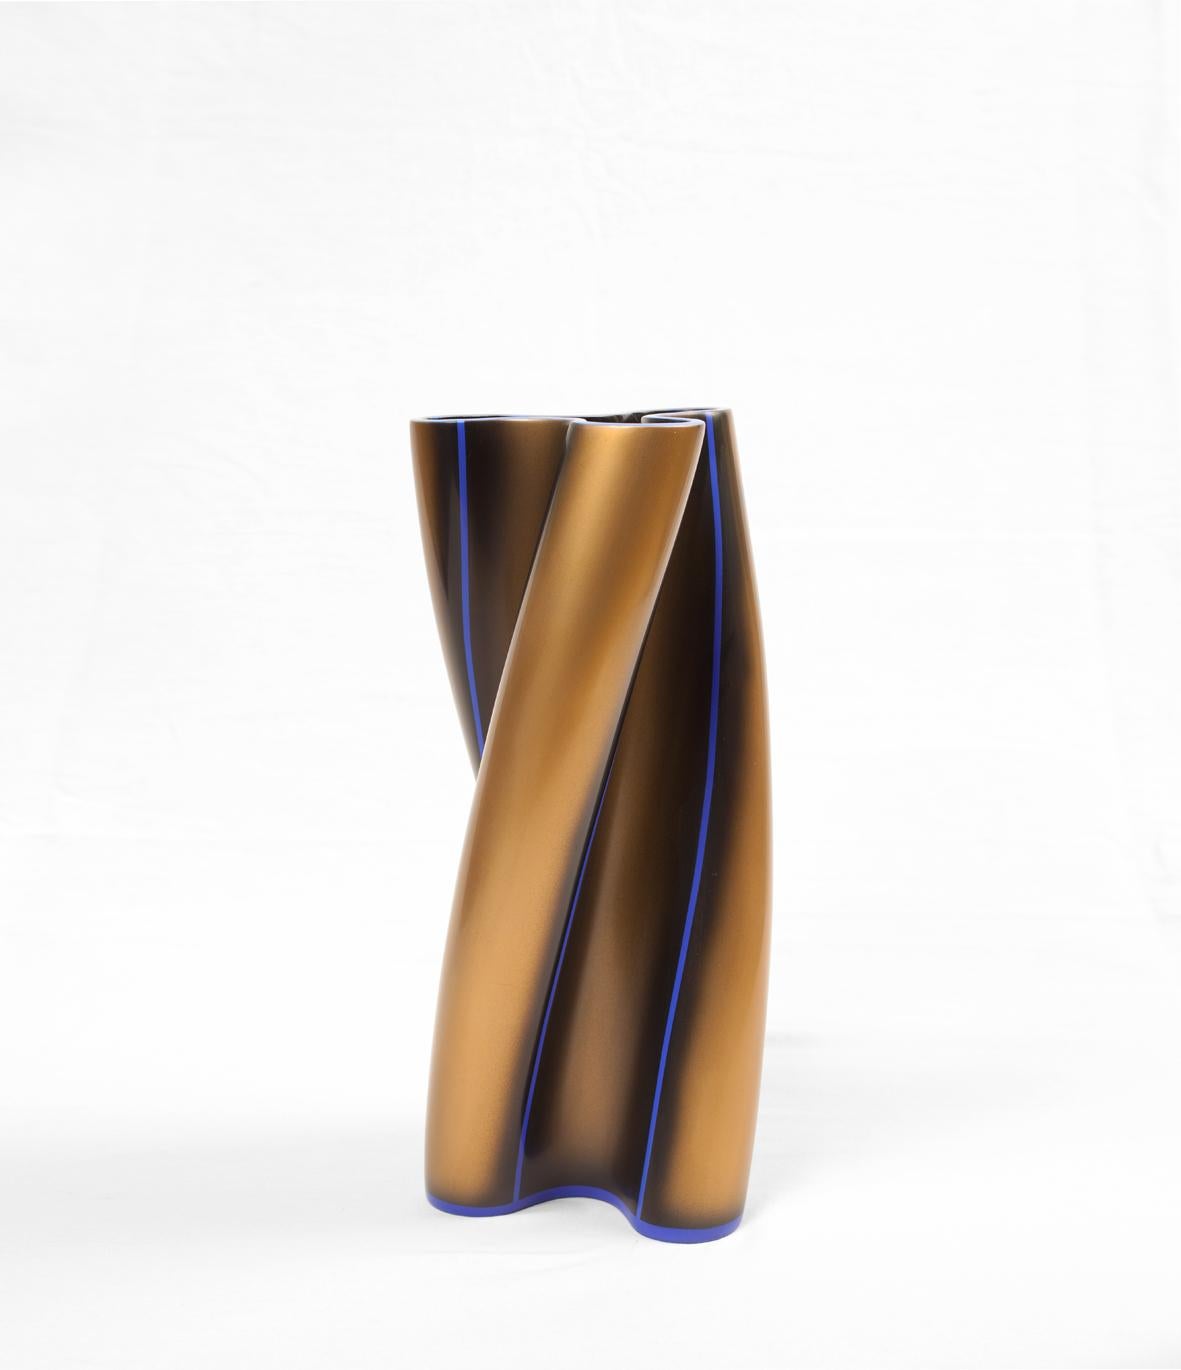 Contemporary lacquered vase by Golem of Italy, this is a decorated version of the twin vessel selected in 2016 for the International Ceramics Biennale in Taipei, the simplified design features three sinuous lobes and a horizontal opening at top. The